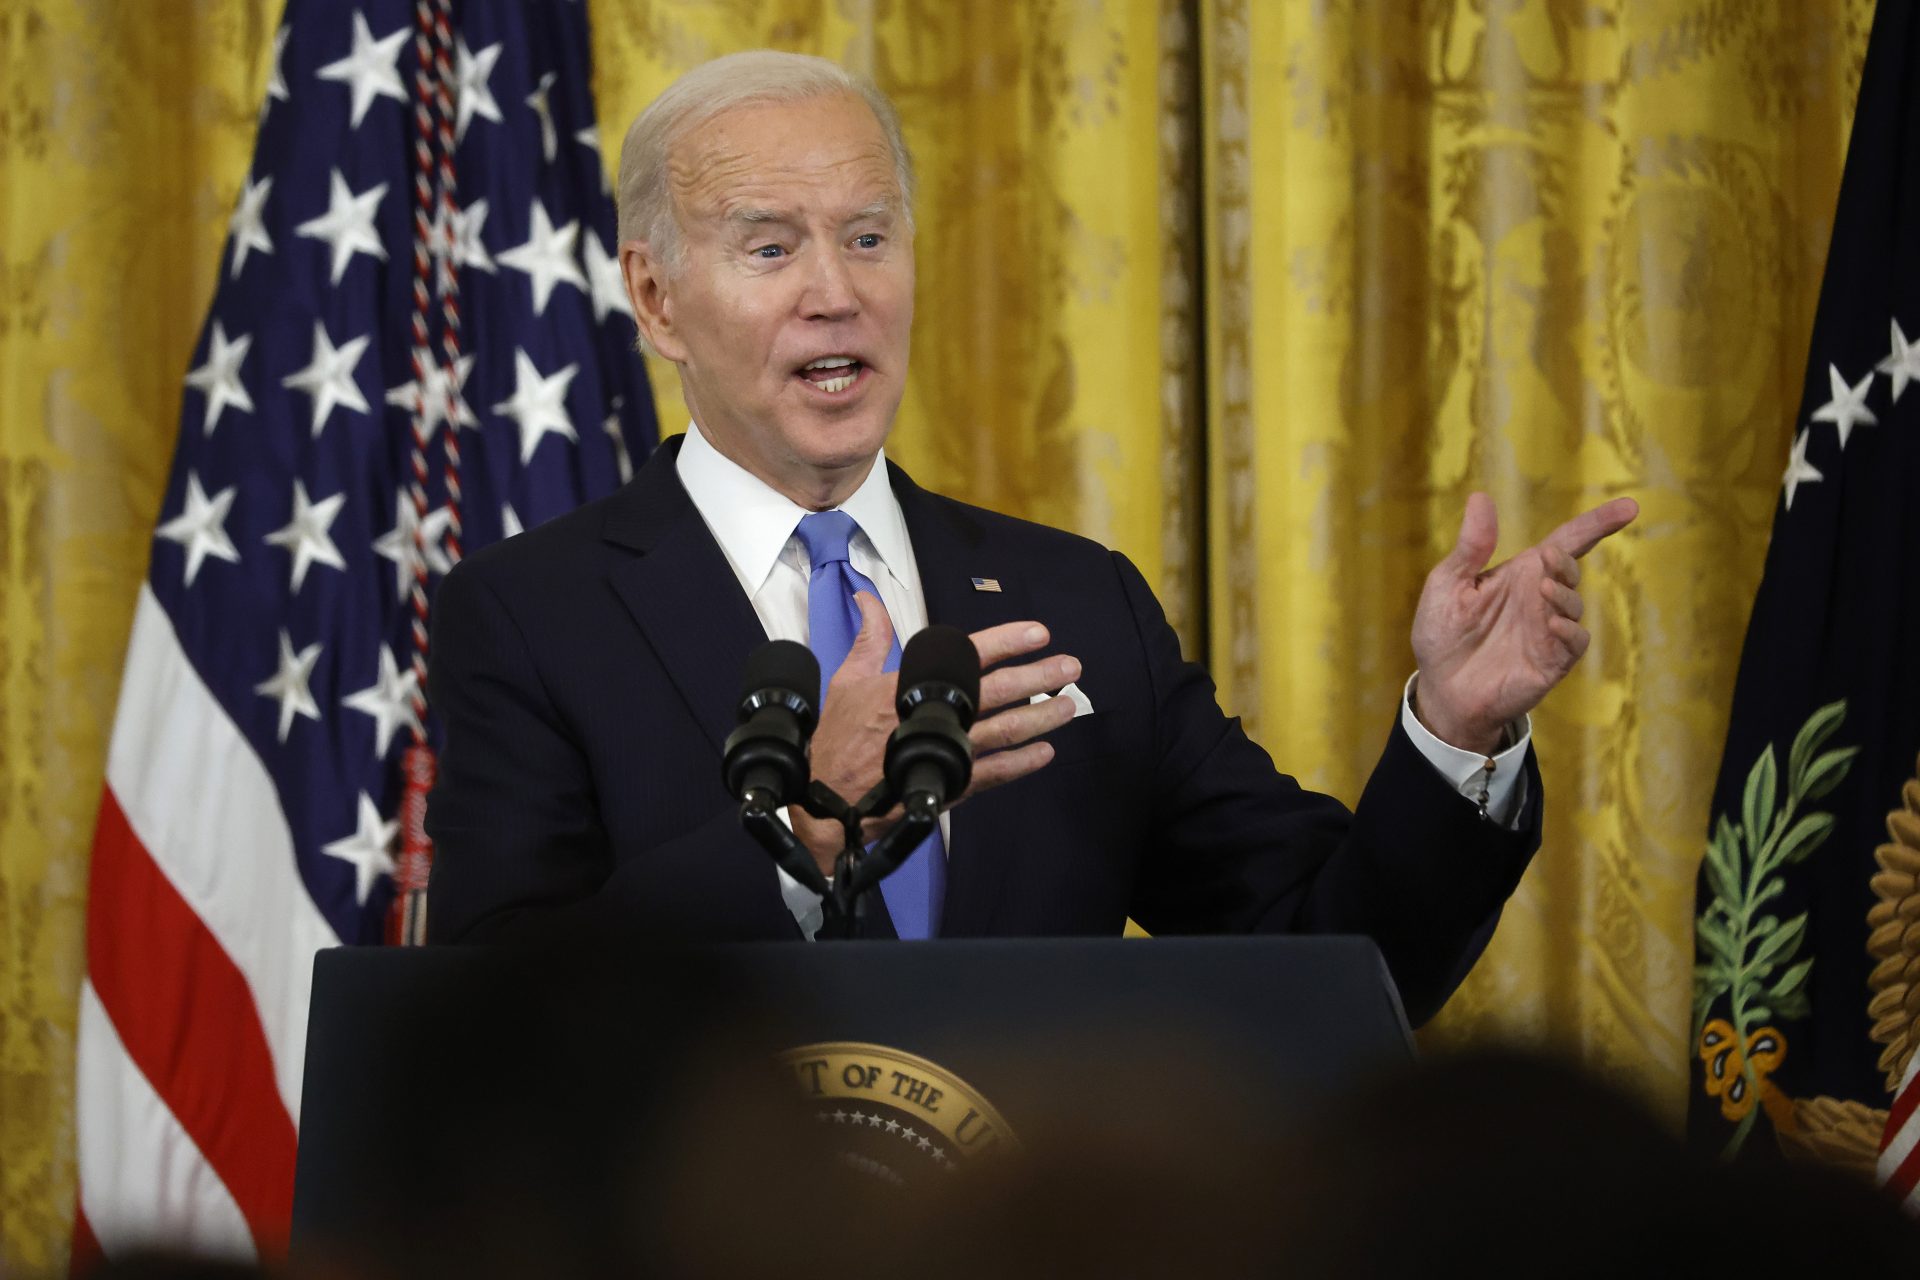 Americans think Trump and Biden are “just too old”